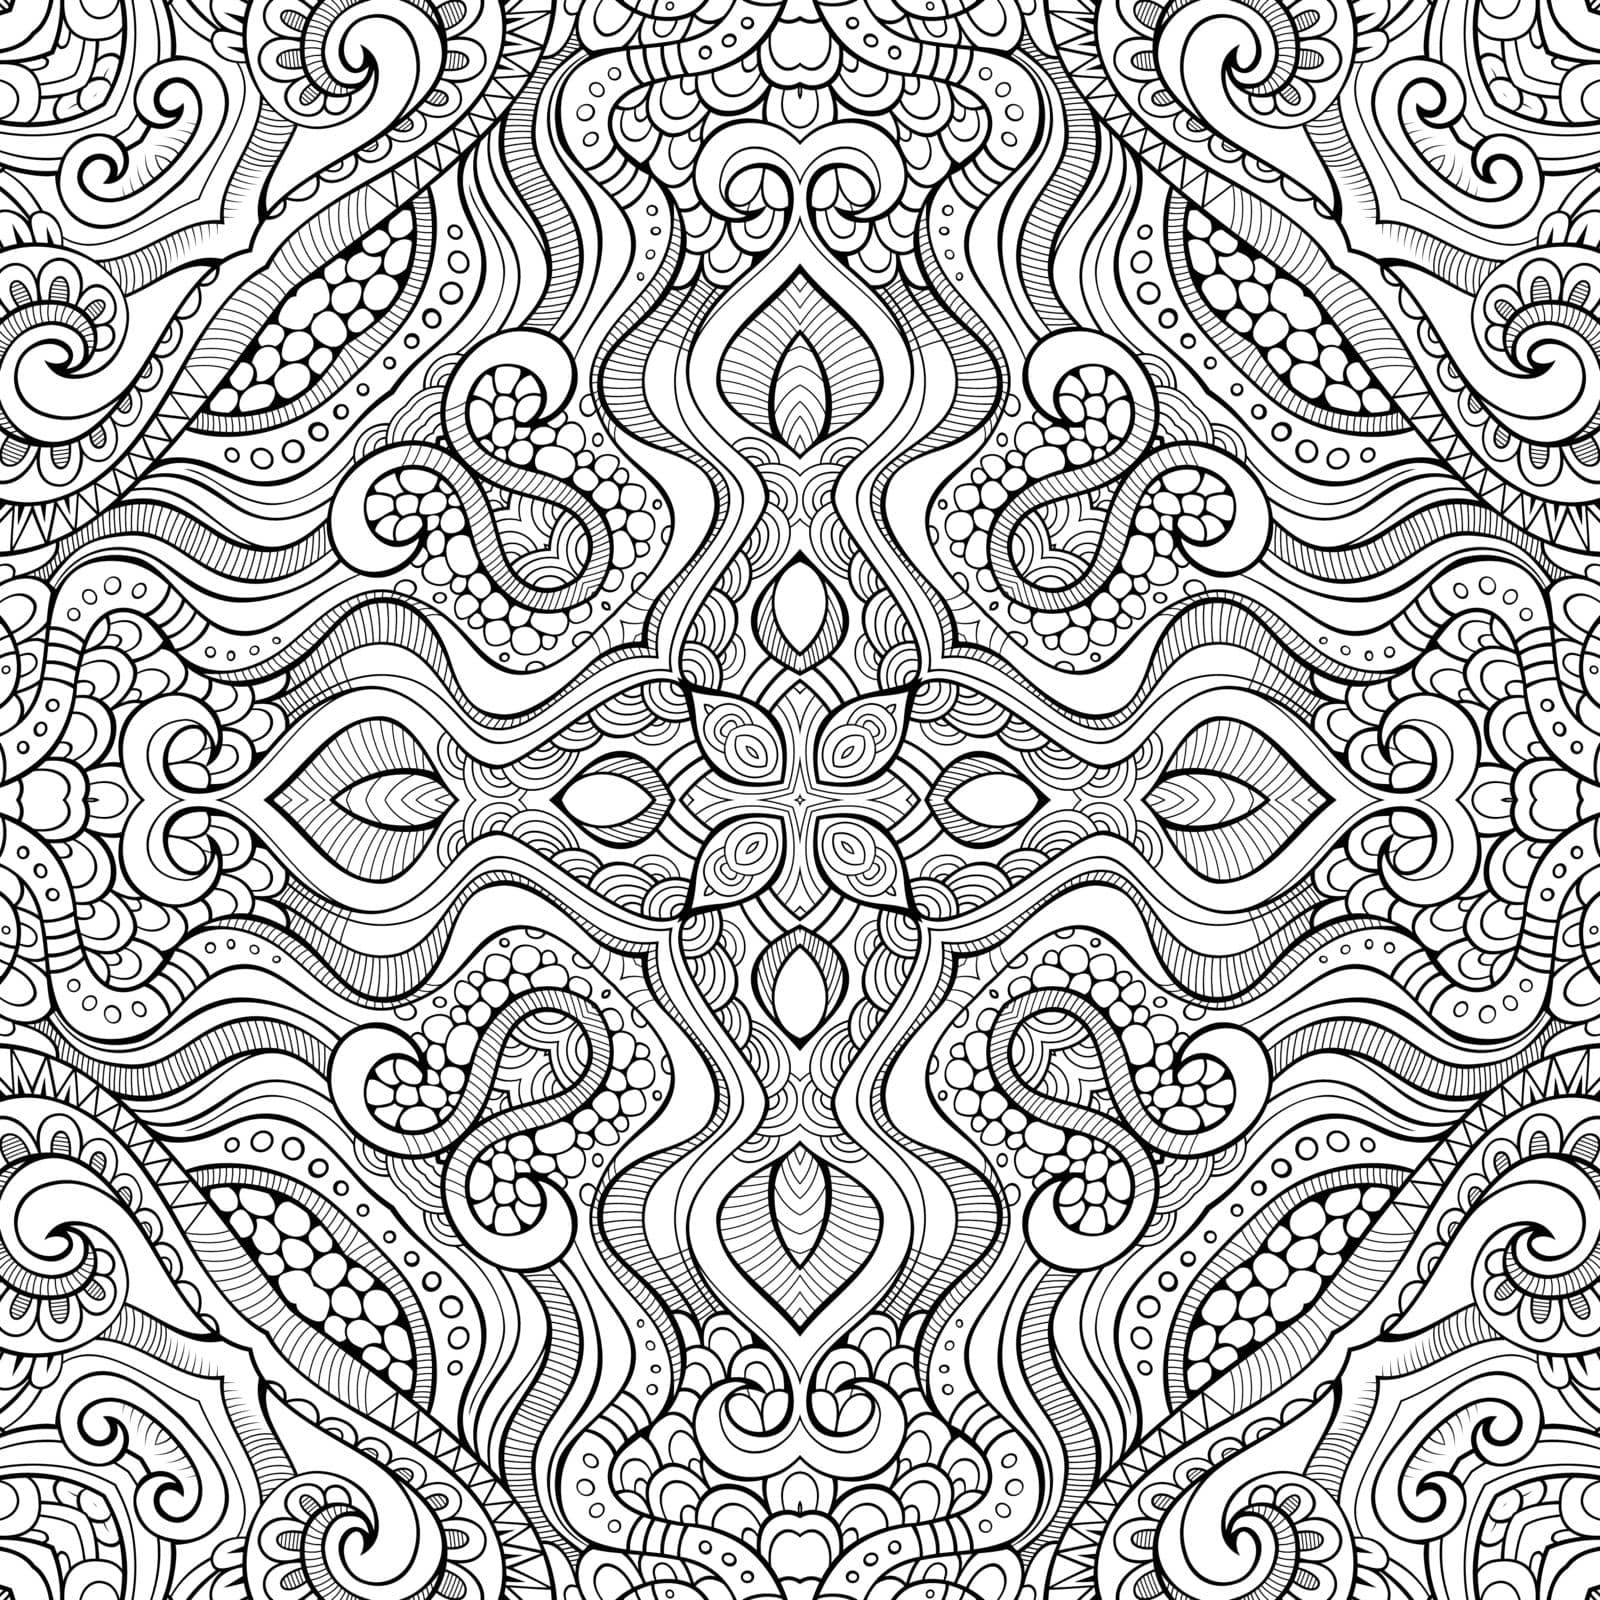 Abstract vector decorative ethnic hand drawn sketchy contour seamless pattern